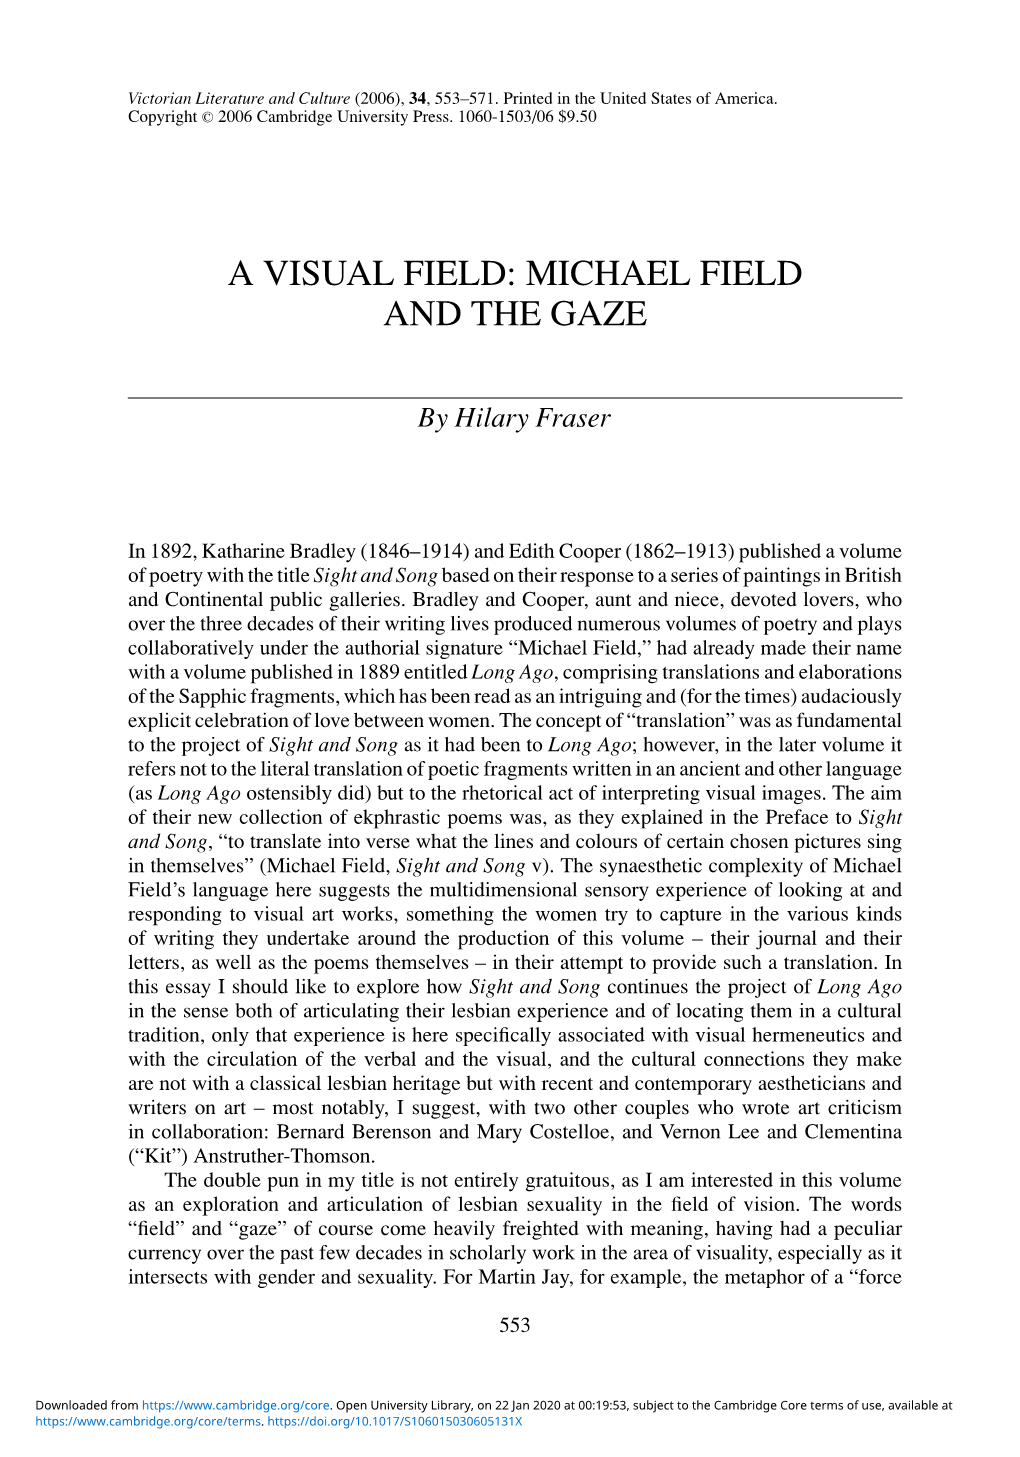 Michael Field and the Gaze